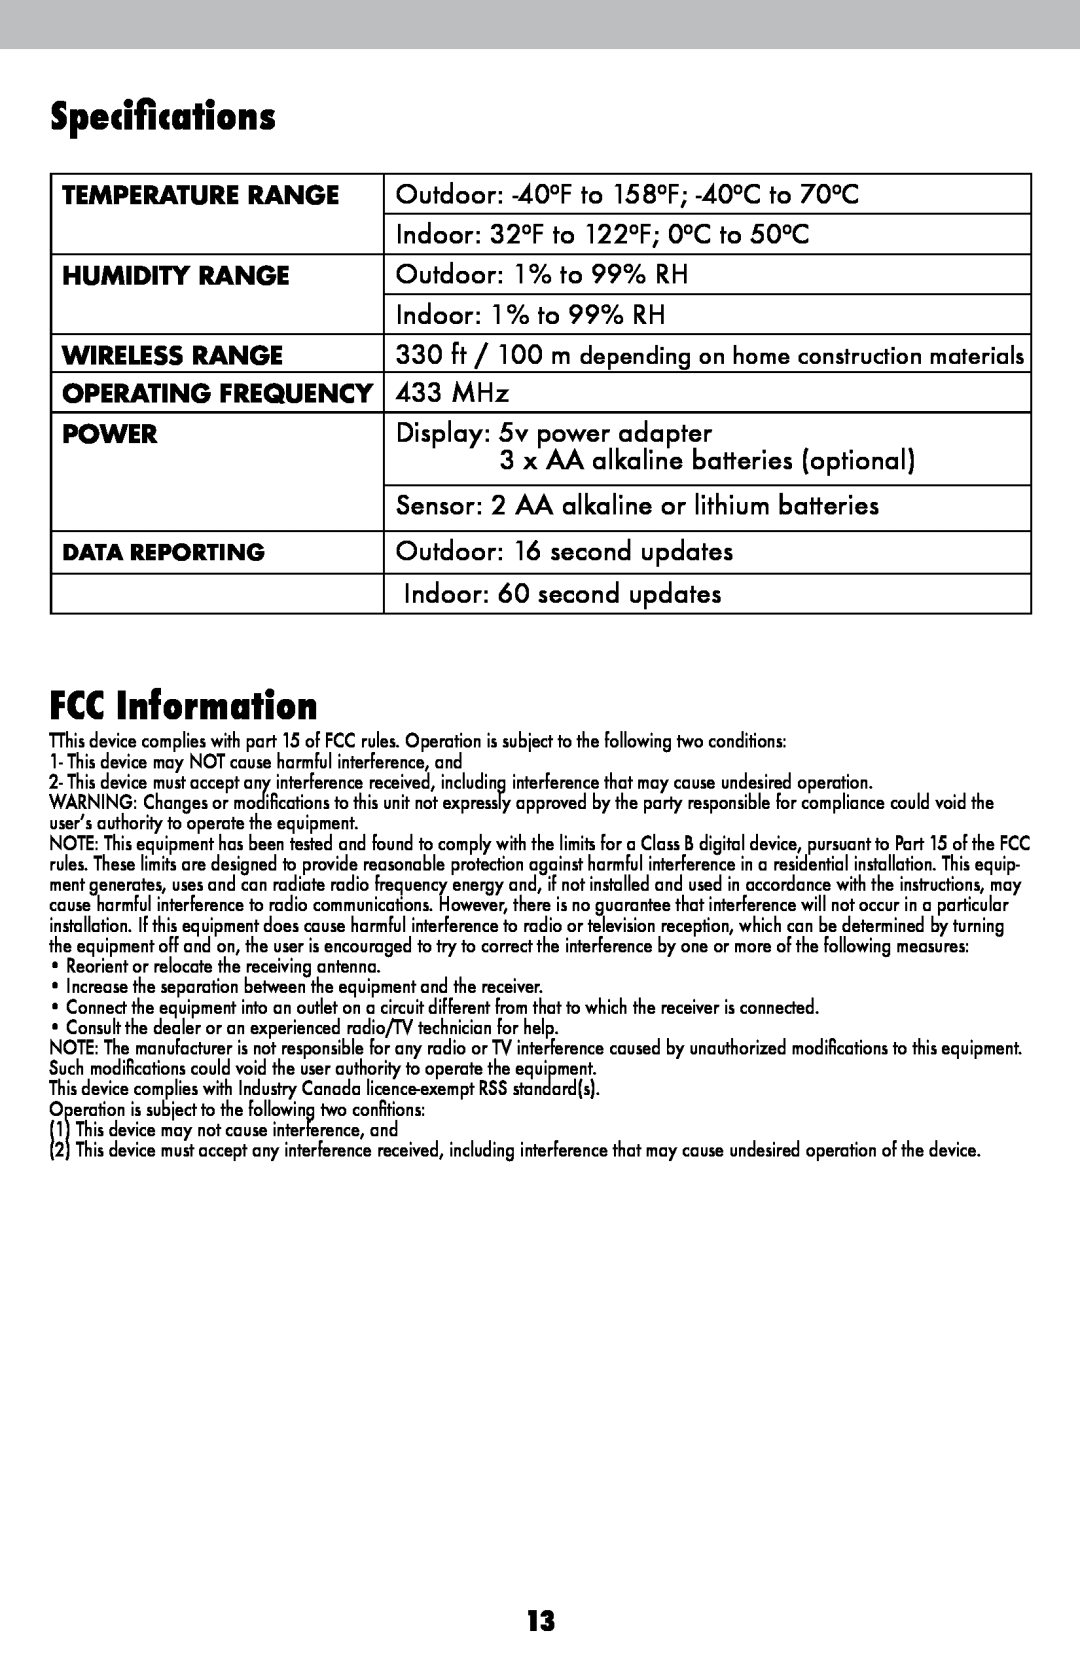 Acu-Rite 2008 instruction manual Specifications, FCC Information 